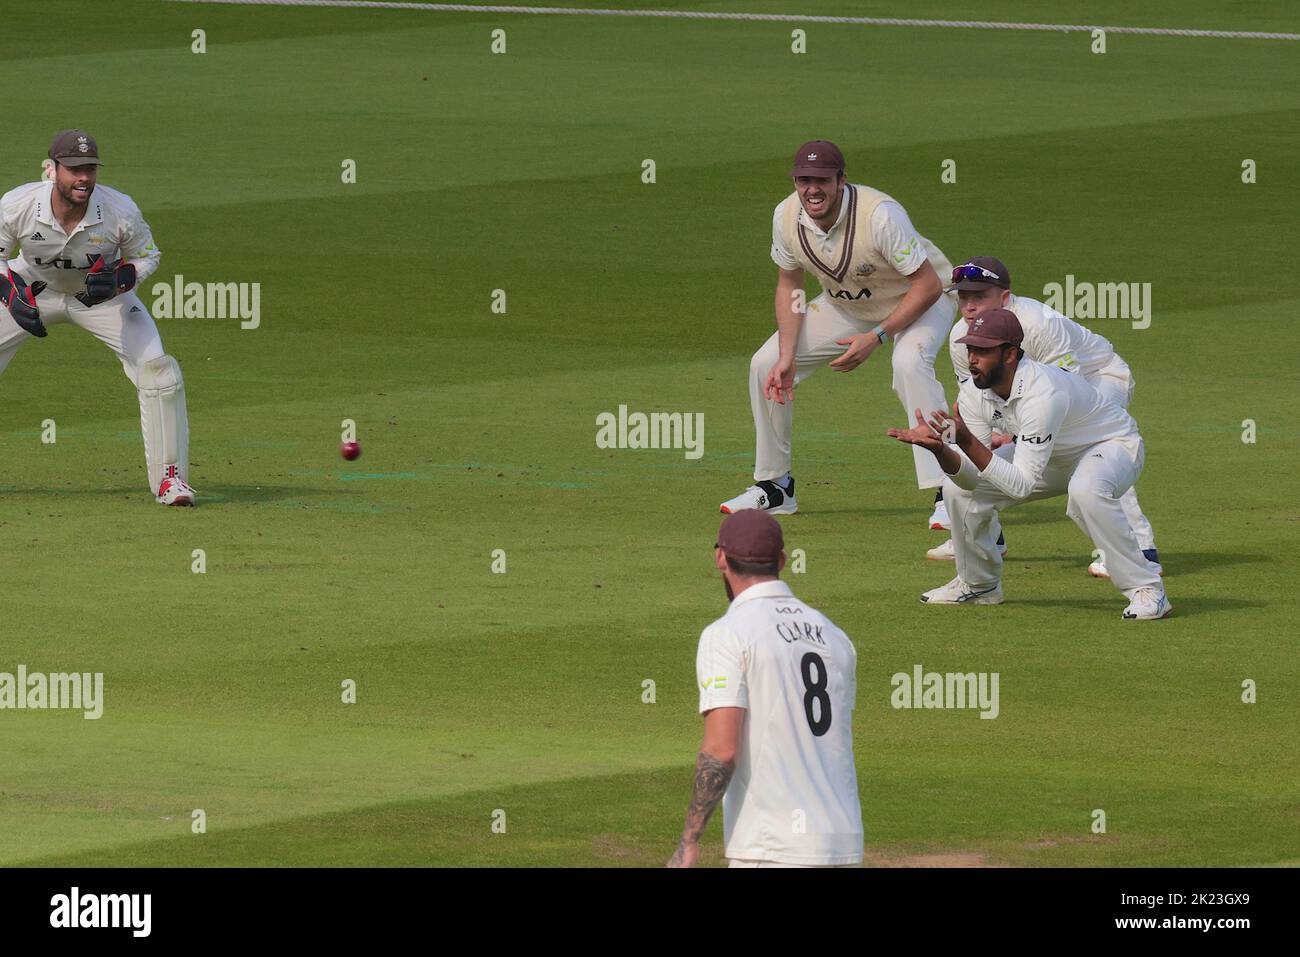 22 September, 2022. London, UK. All eyes on Surrey’s Ryan Patel as he prepares to take a catch to end the innings of Adam Lyth as Surrey take on Yorkshire in the County Championship at the Kia Oval, day three David Rowe/Alamy Live News Stock Photo